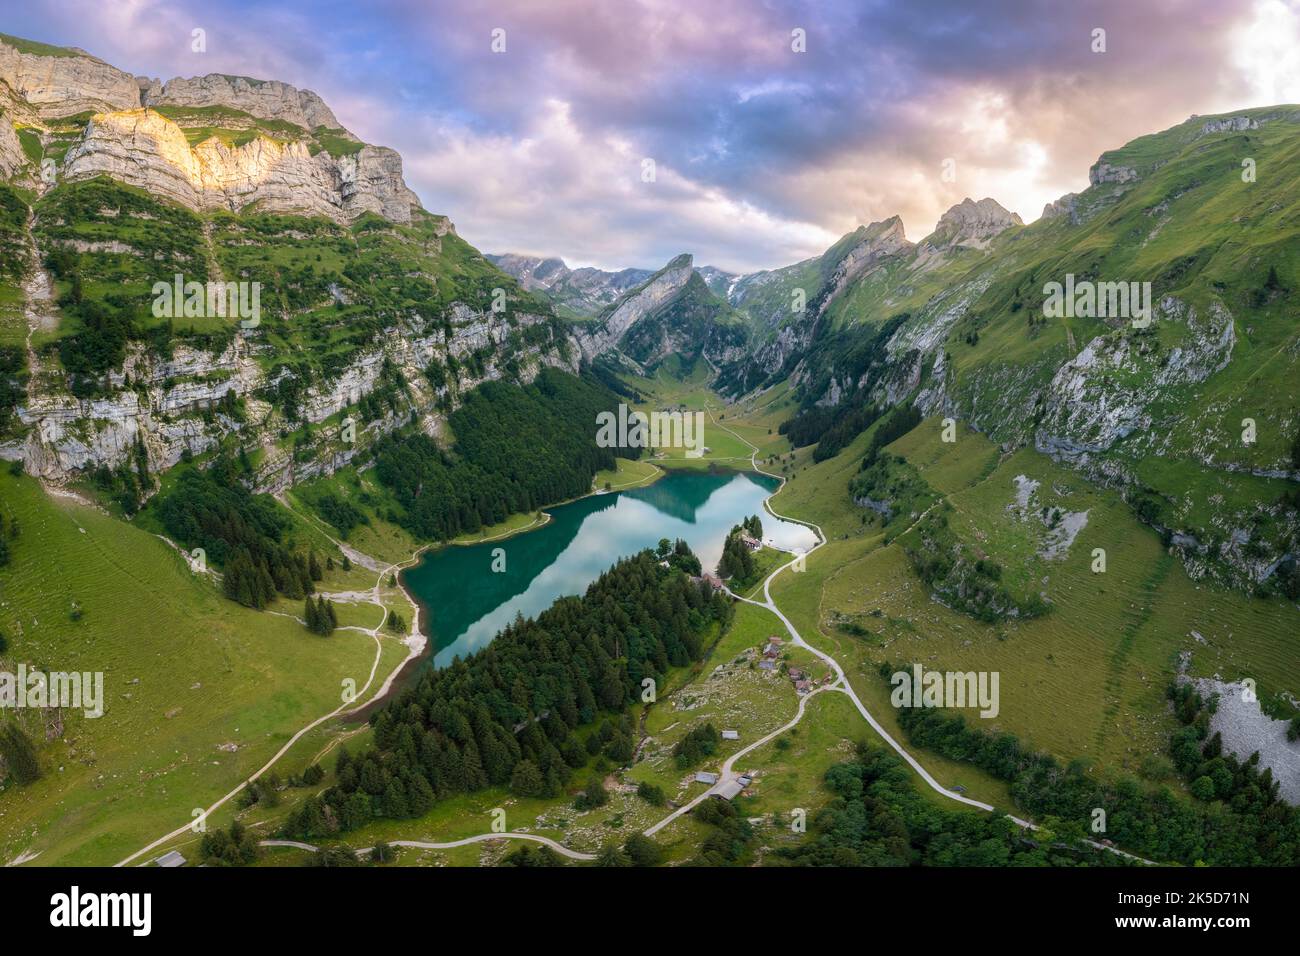 View of Seealpsee and the surrounding mountains at sunset. Canton of Appenzell, Alpstein, Switzerland, Europe. Stock Photo